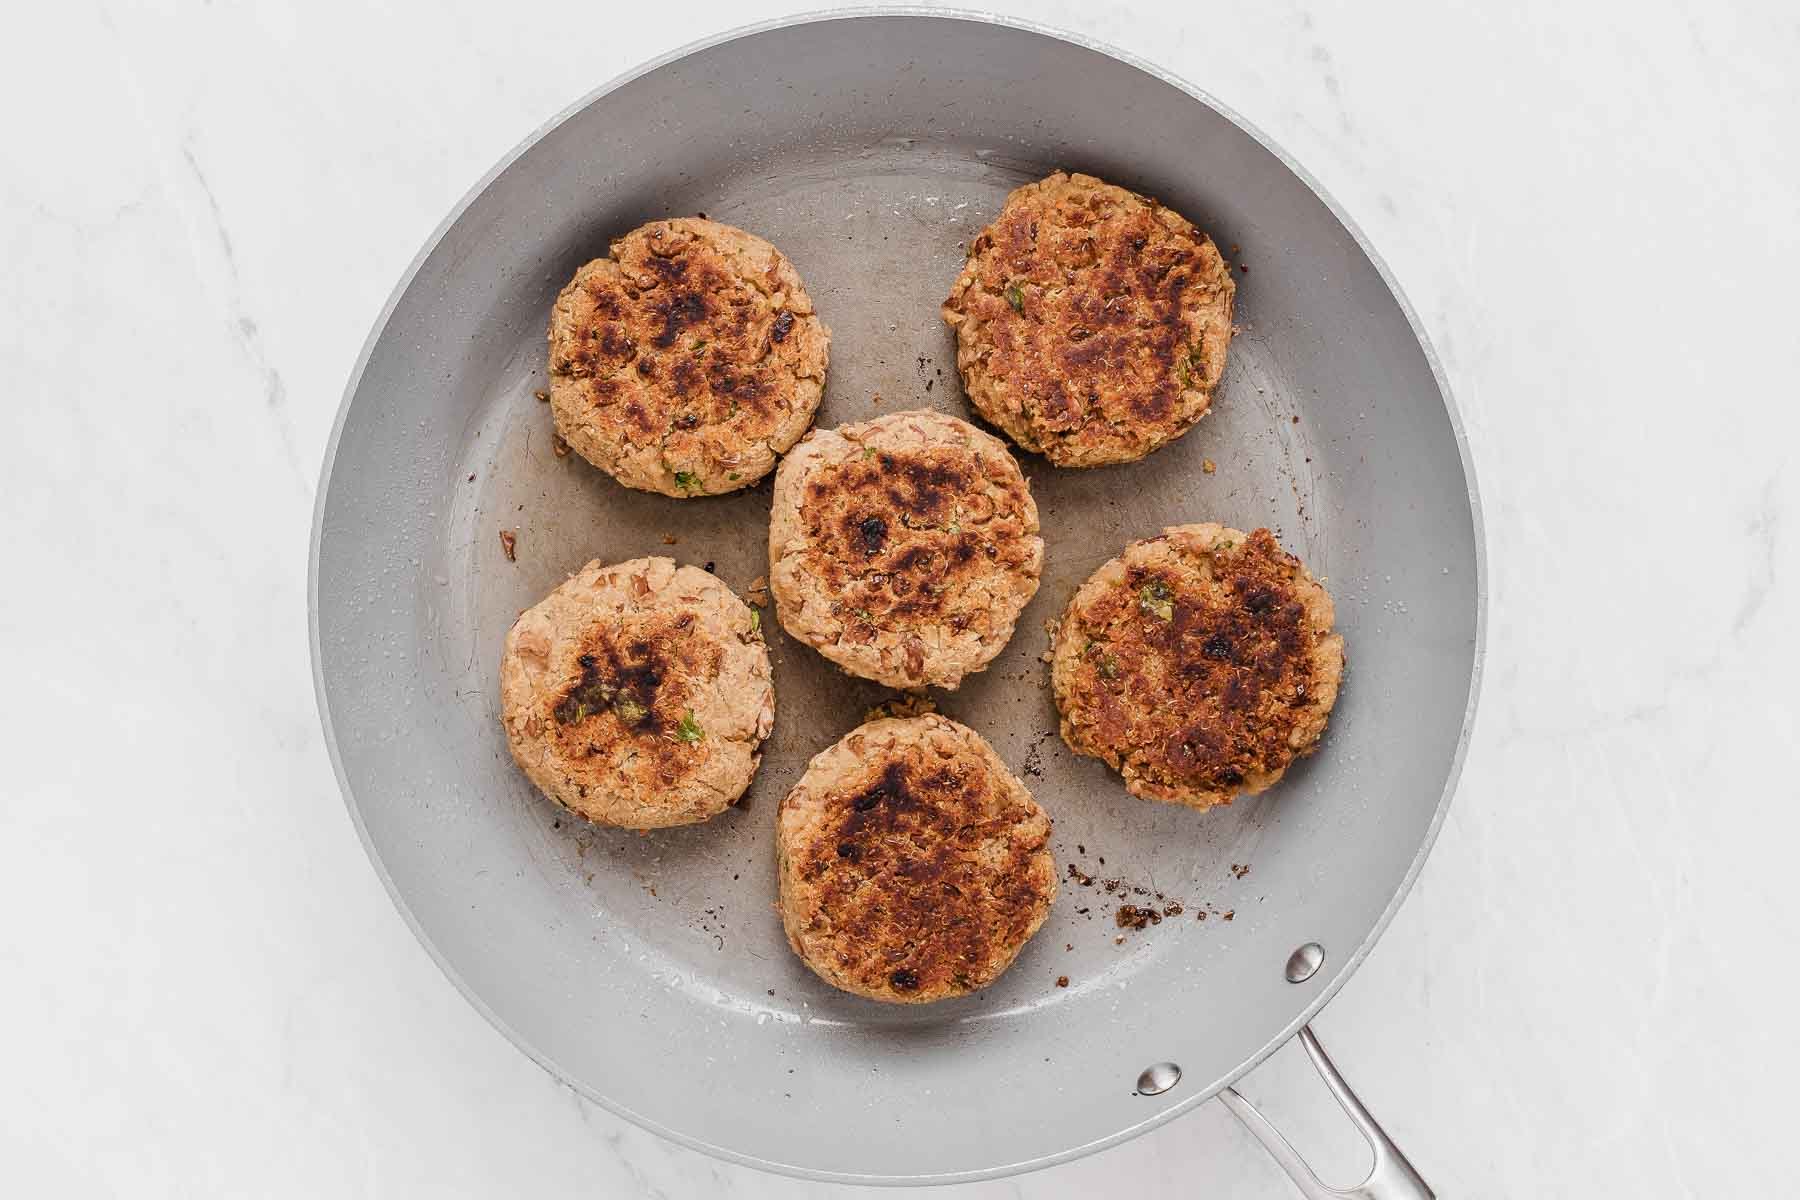 Six pinto bean burgers cooked to golden brown on one side in a grey skillet.